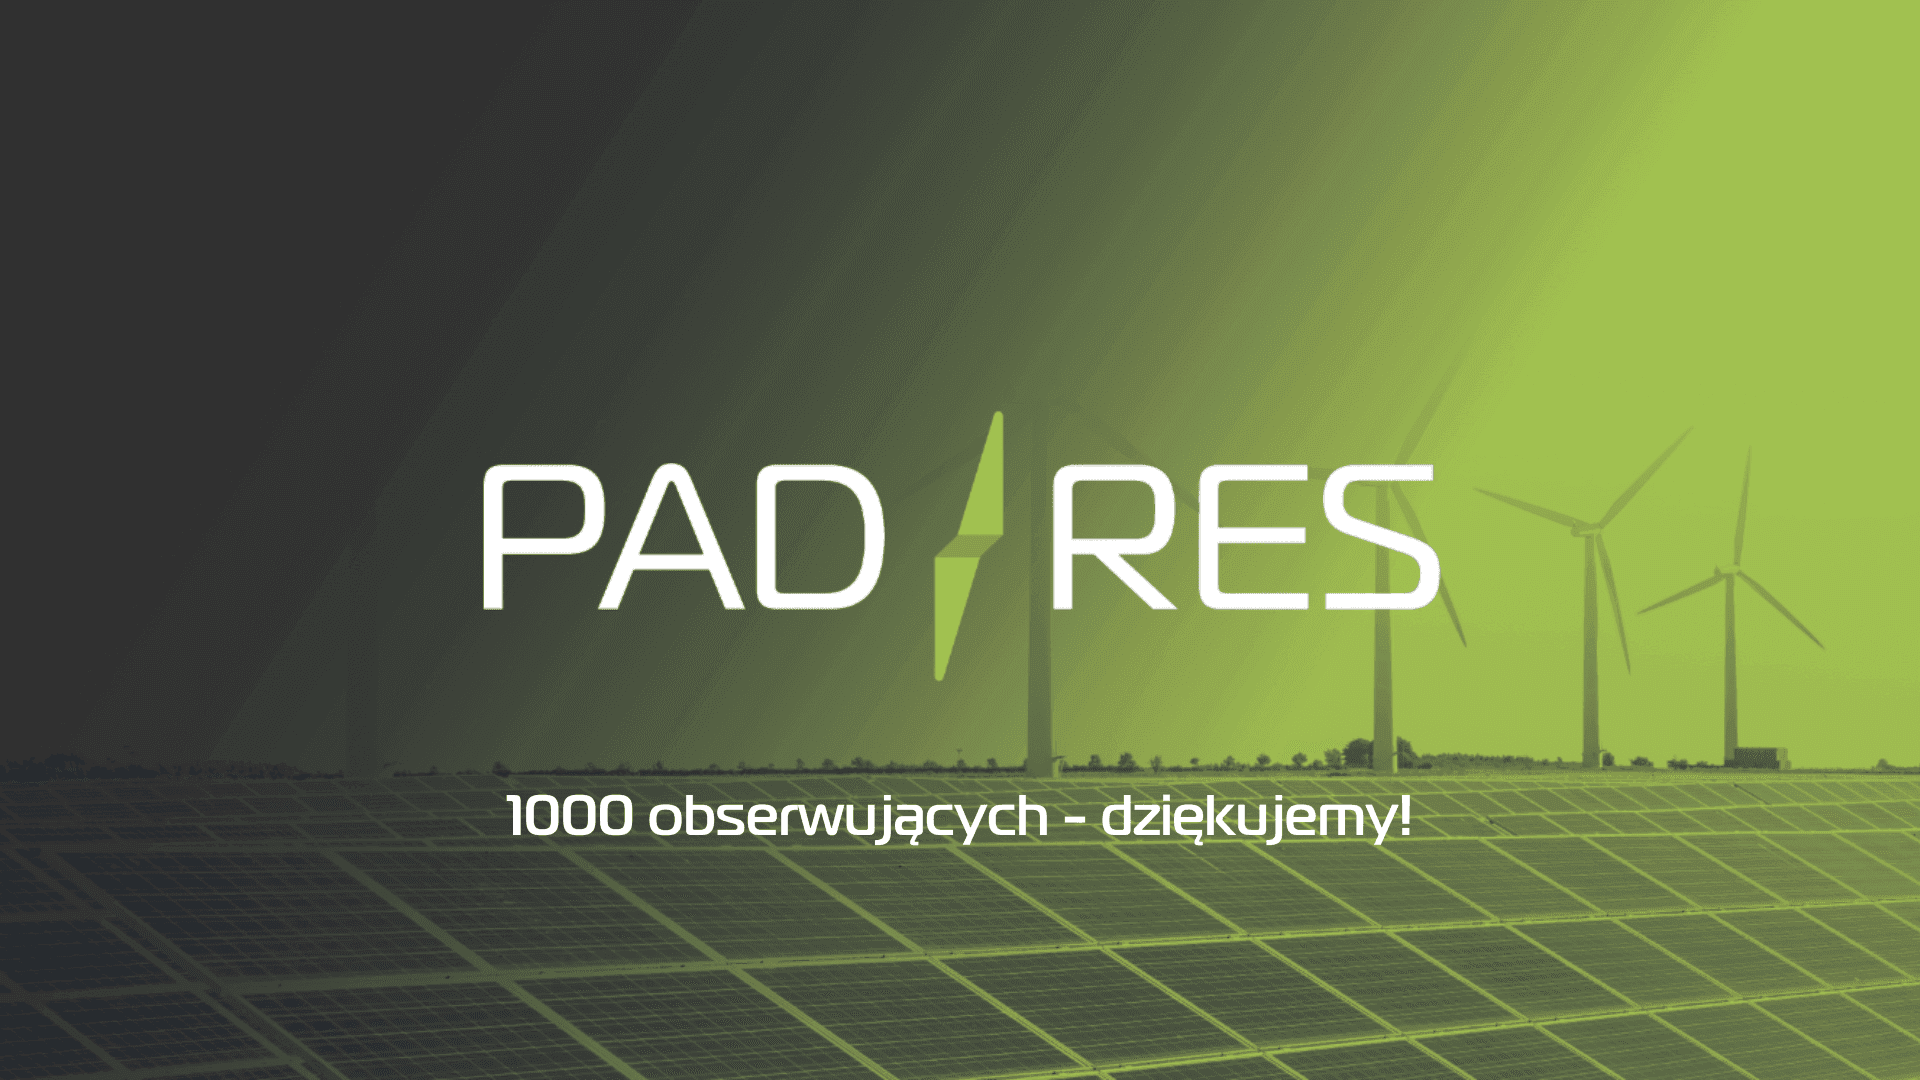 Booming green energy: PAD RES Crosses the 1,000-watcher threshold on LinkedIn-article-main-image